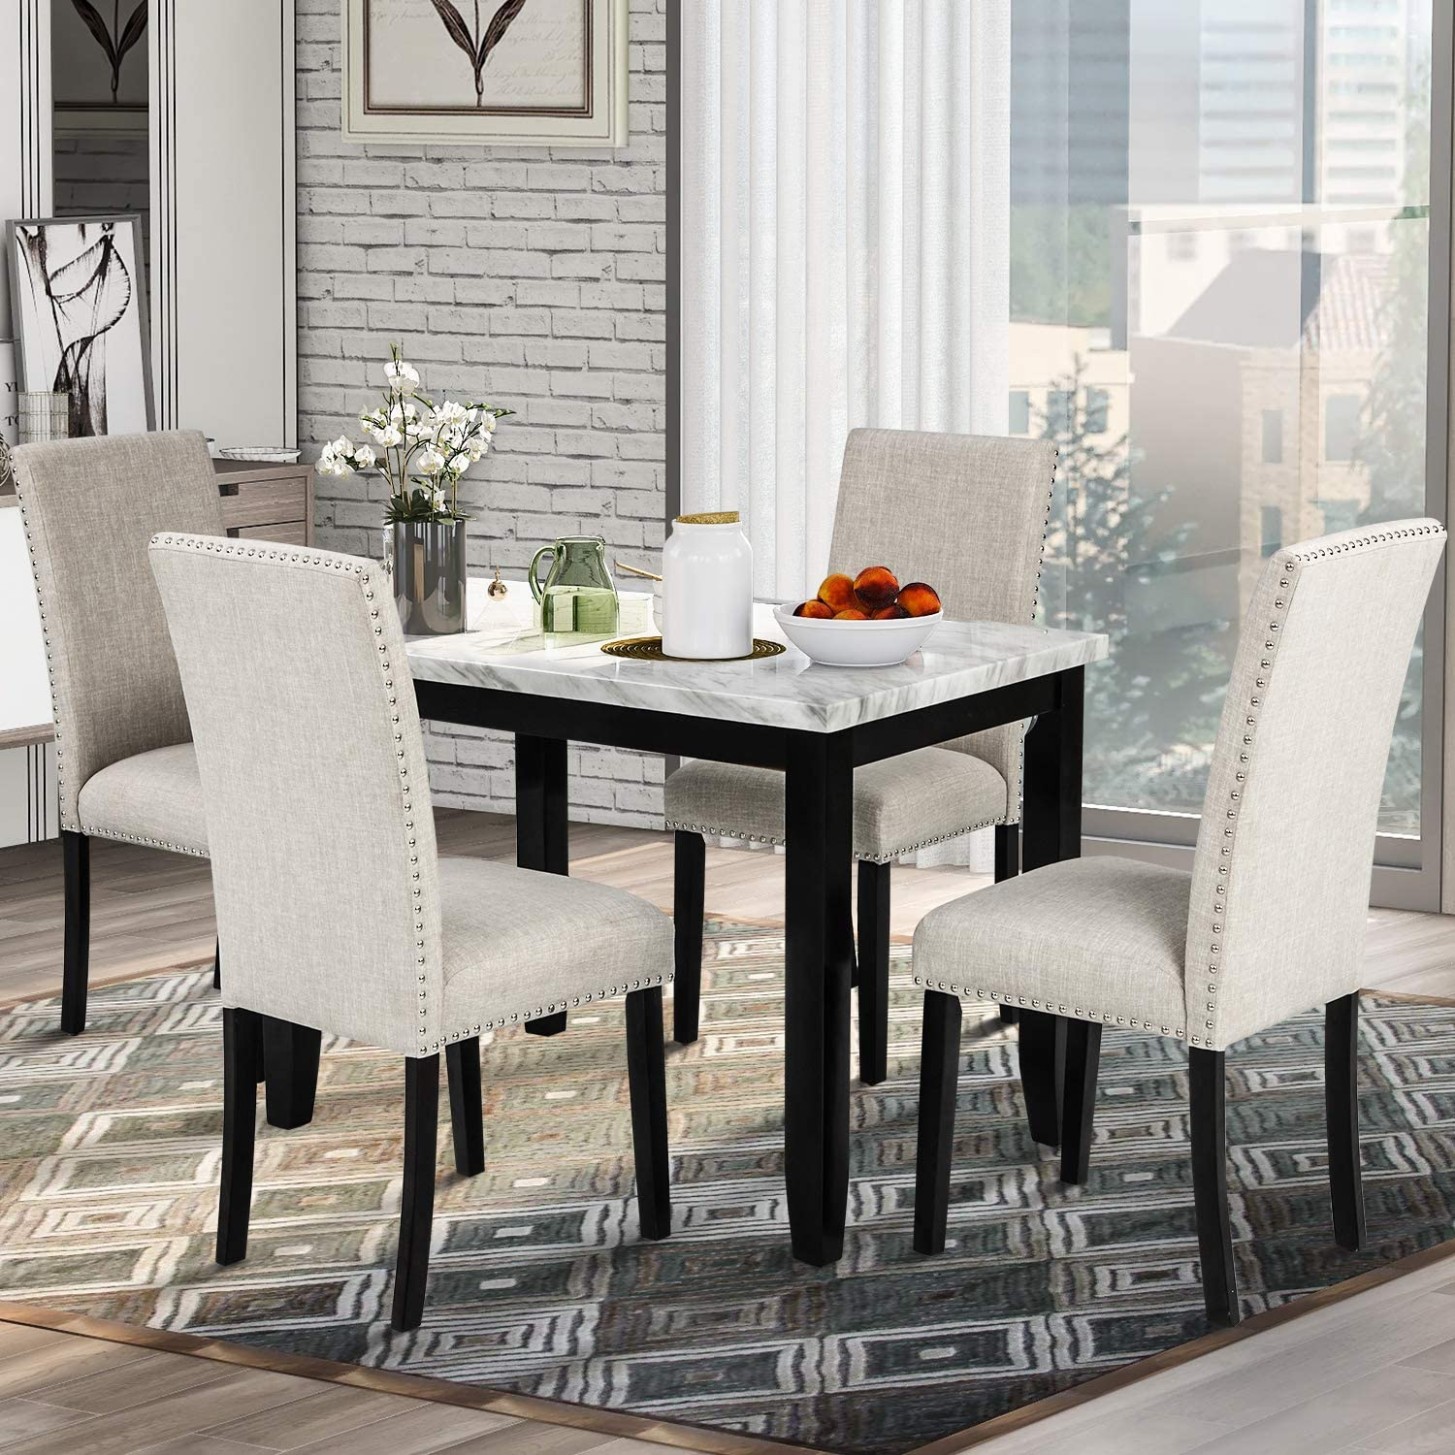 8 Piece Counter Height Dining Table Set, Faux Marble Modern Kitchen Table  with Chairs for Home or Restaurant - modern kitchen counter set